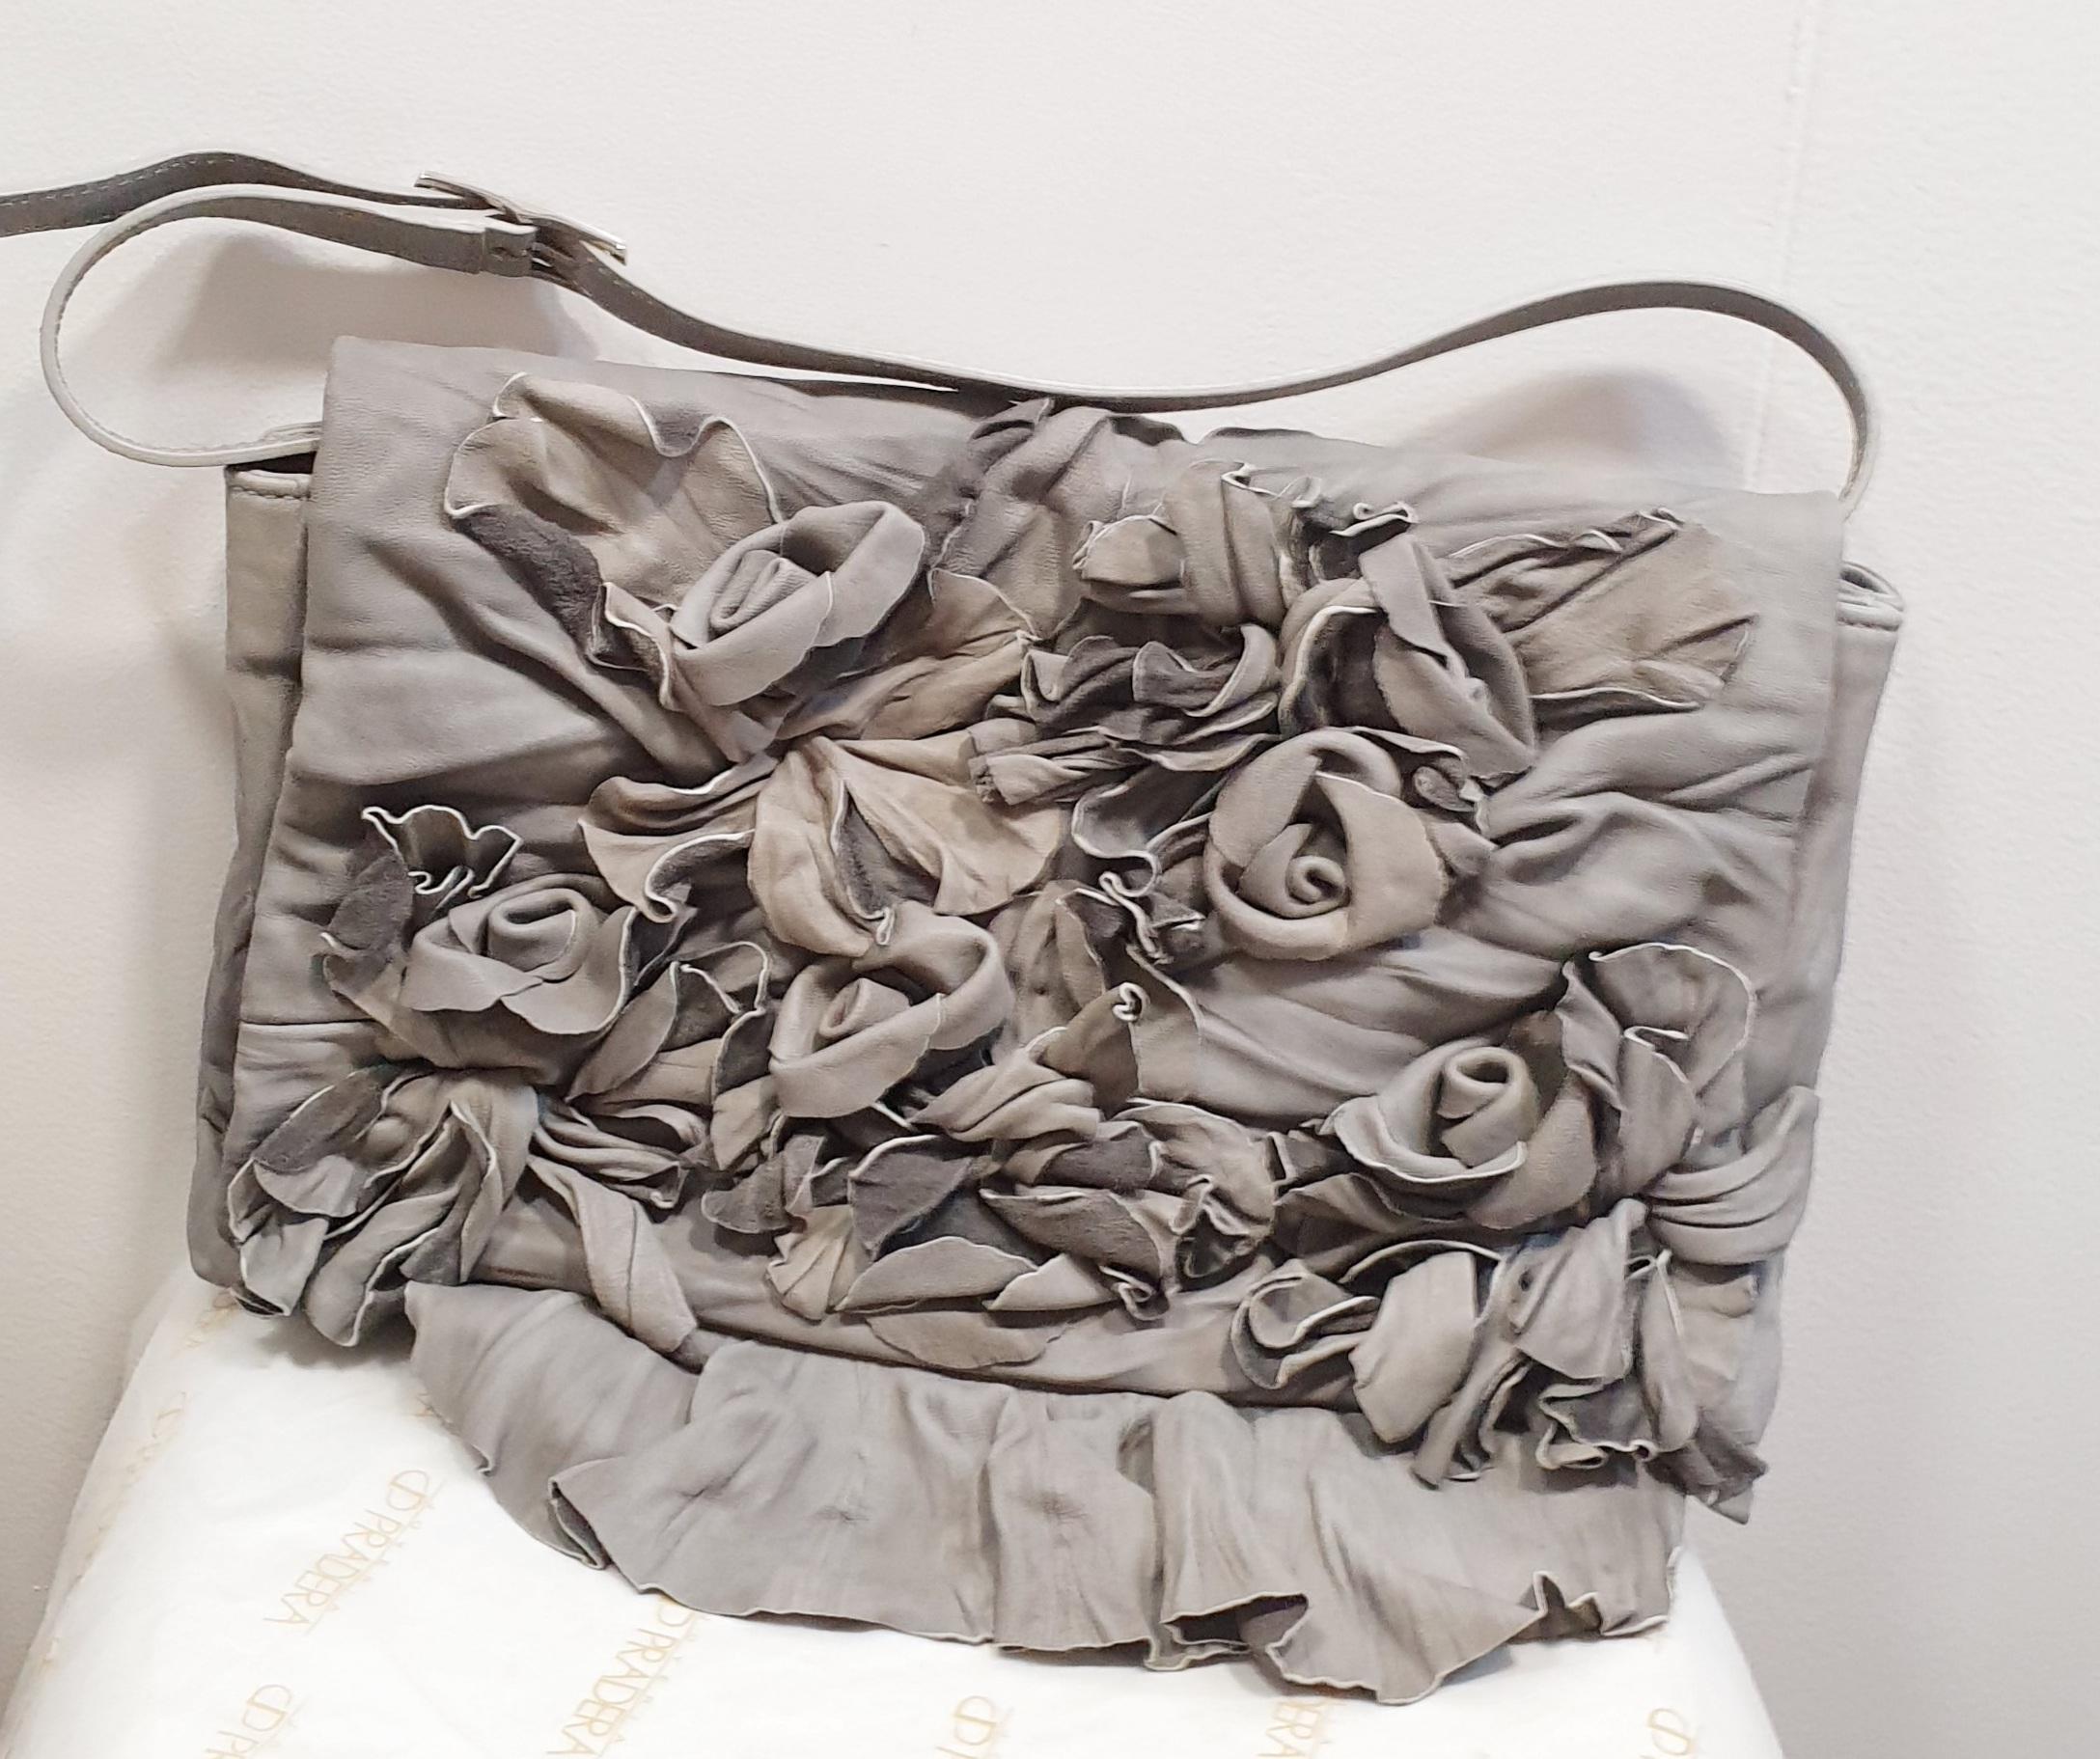 100% authentic Valentino shoulder bag with attached flowers in light gray wrinkled leather. Opens with a magnetic snap button under the flap. Lined in pearl gray satin with one zipper pocket against the back.. Comes with dust bag.

Width: 34cm